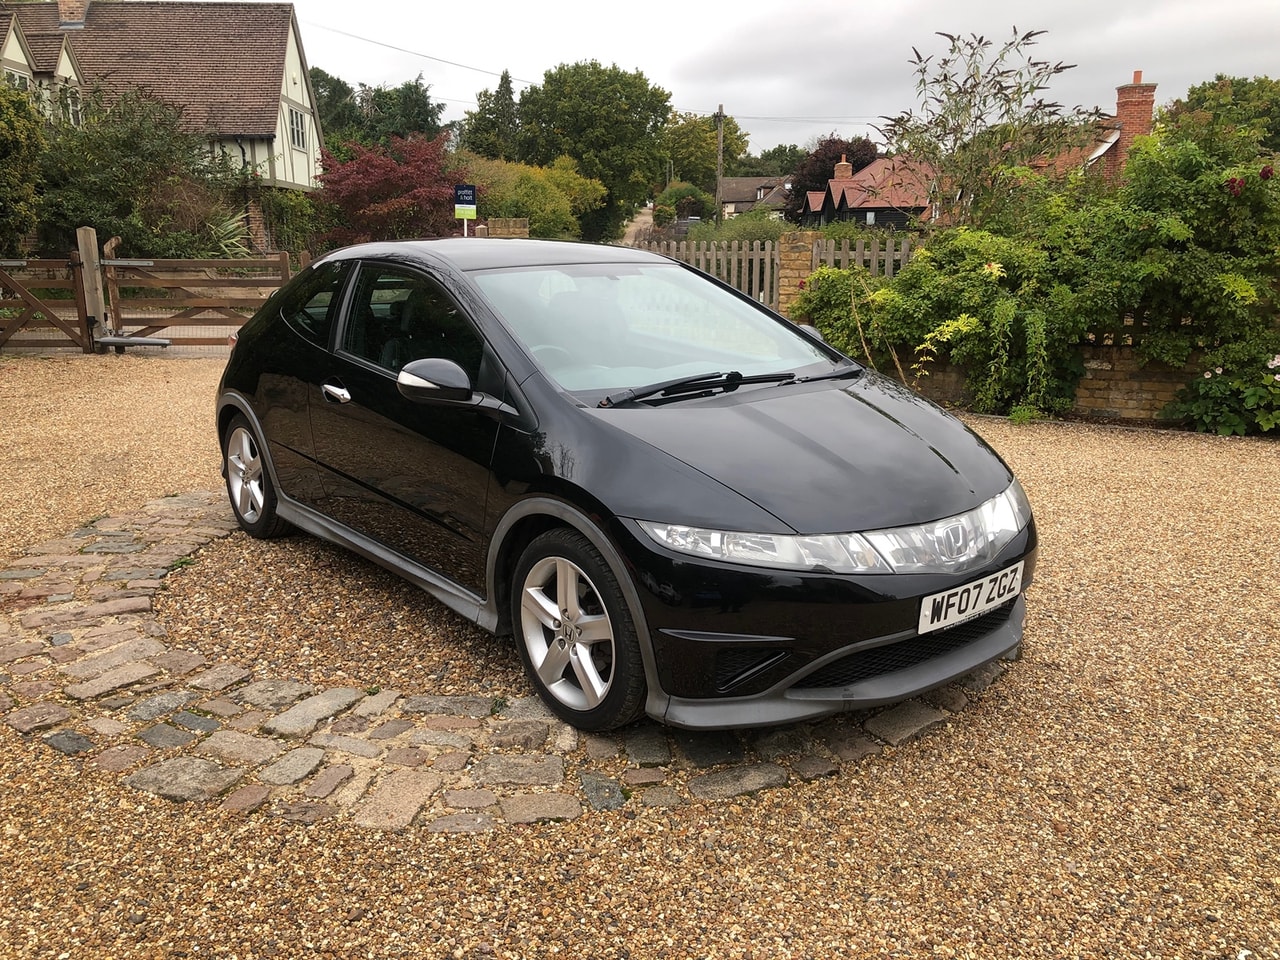 2007 HONDA Civic 1.8 Type S - Picture 1 of 12